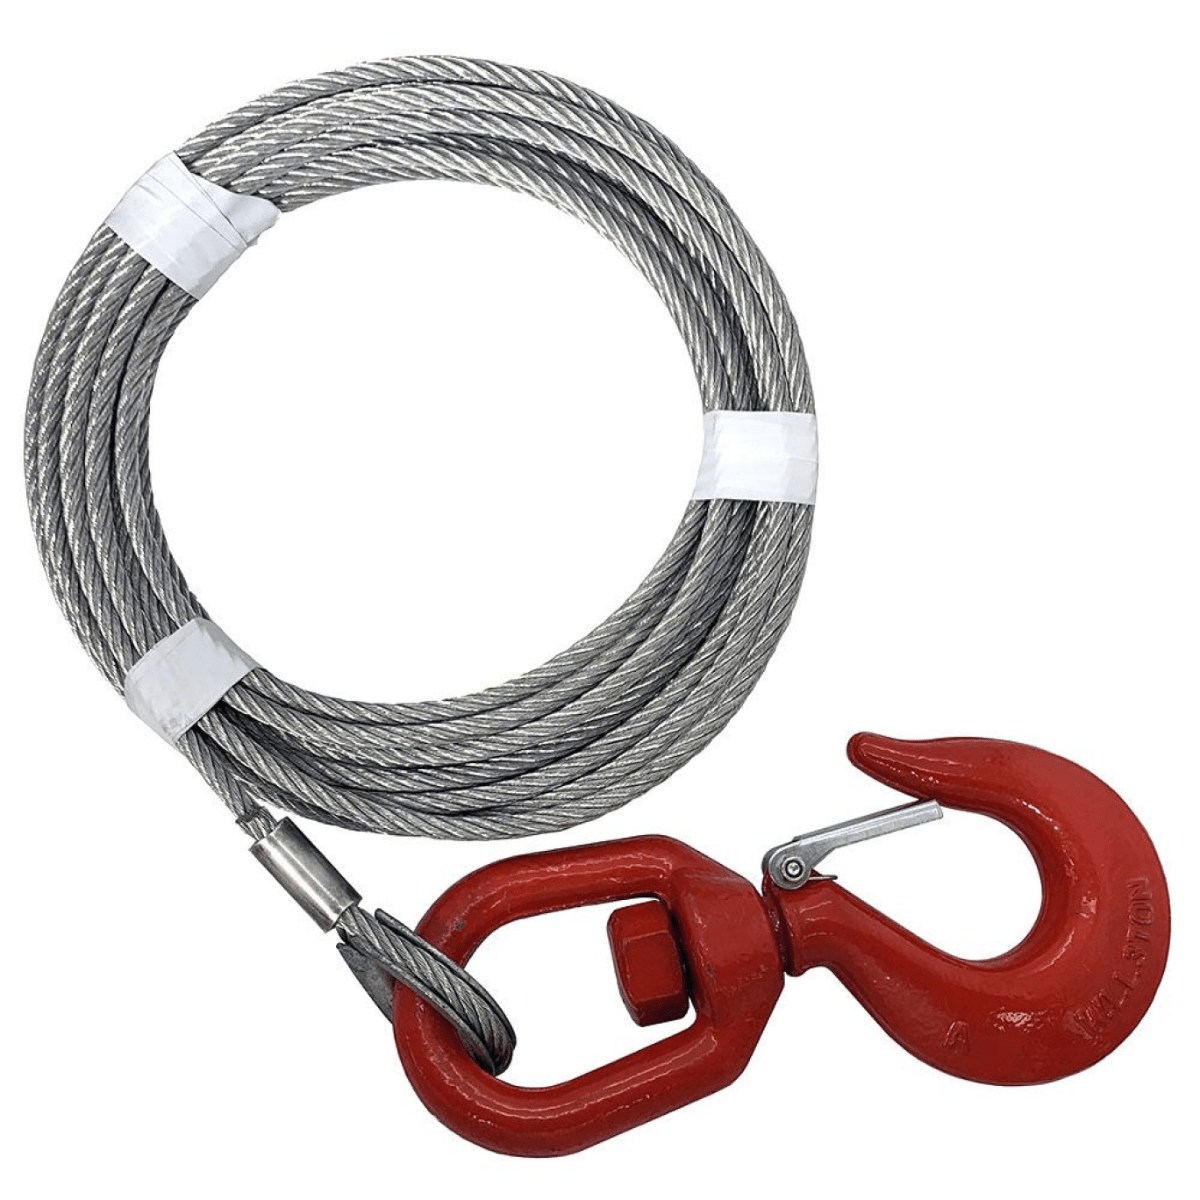 IC Brindle Galvanised Steel Recovery Winch Cable with Hook - I.C. Brindle